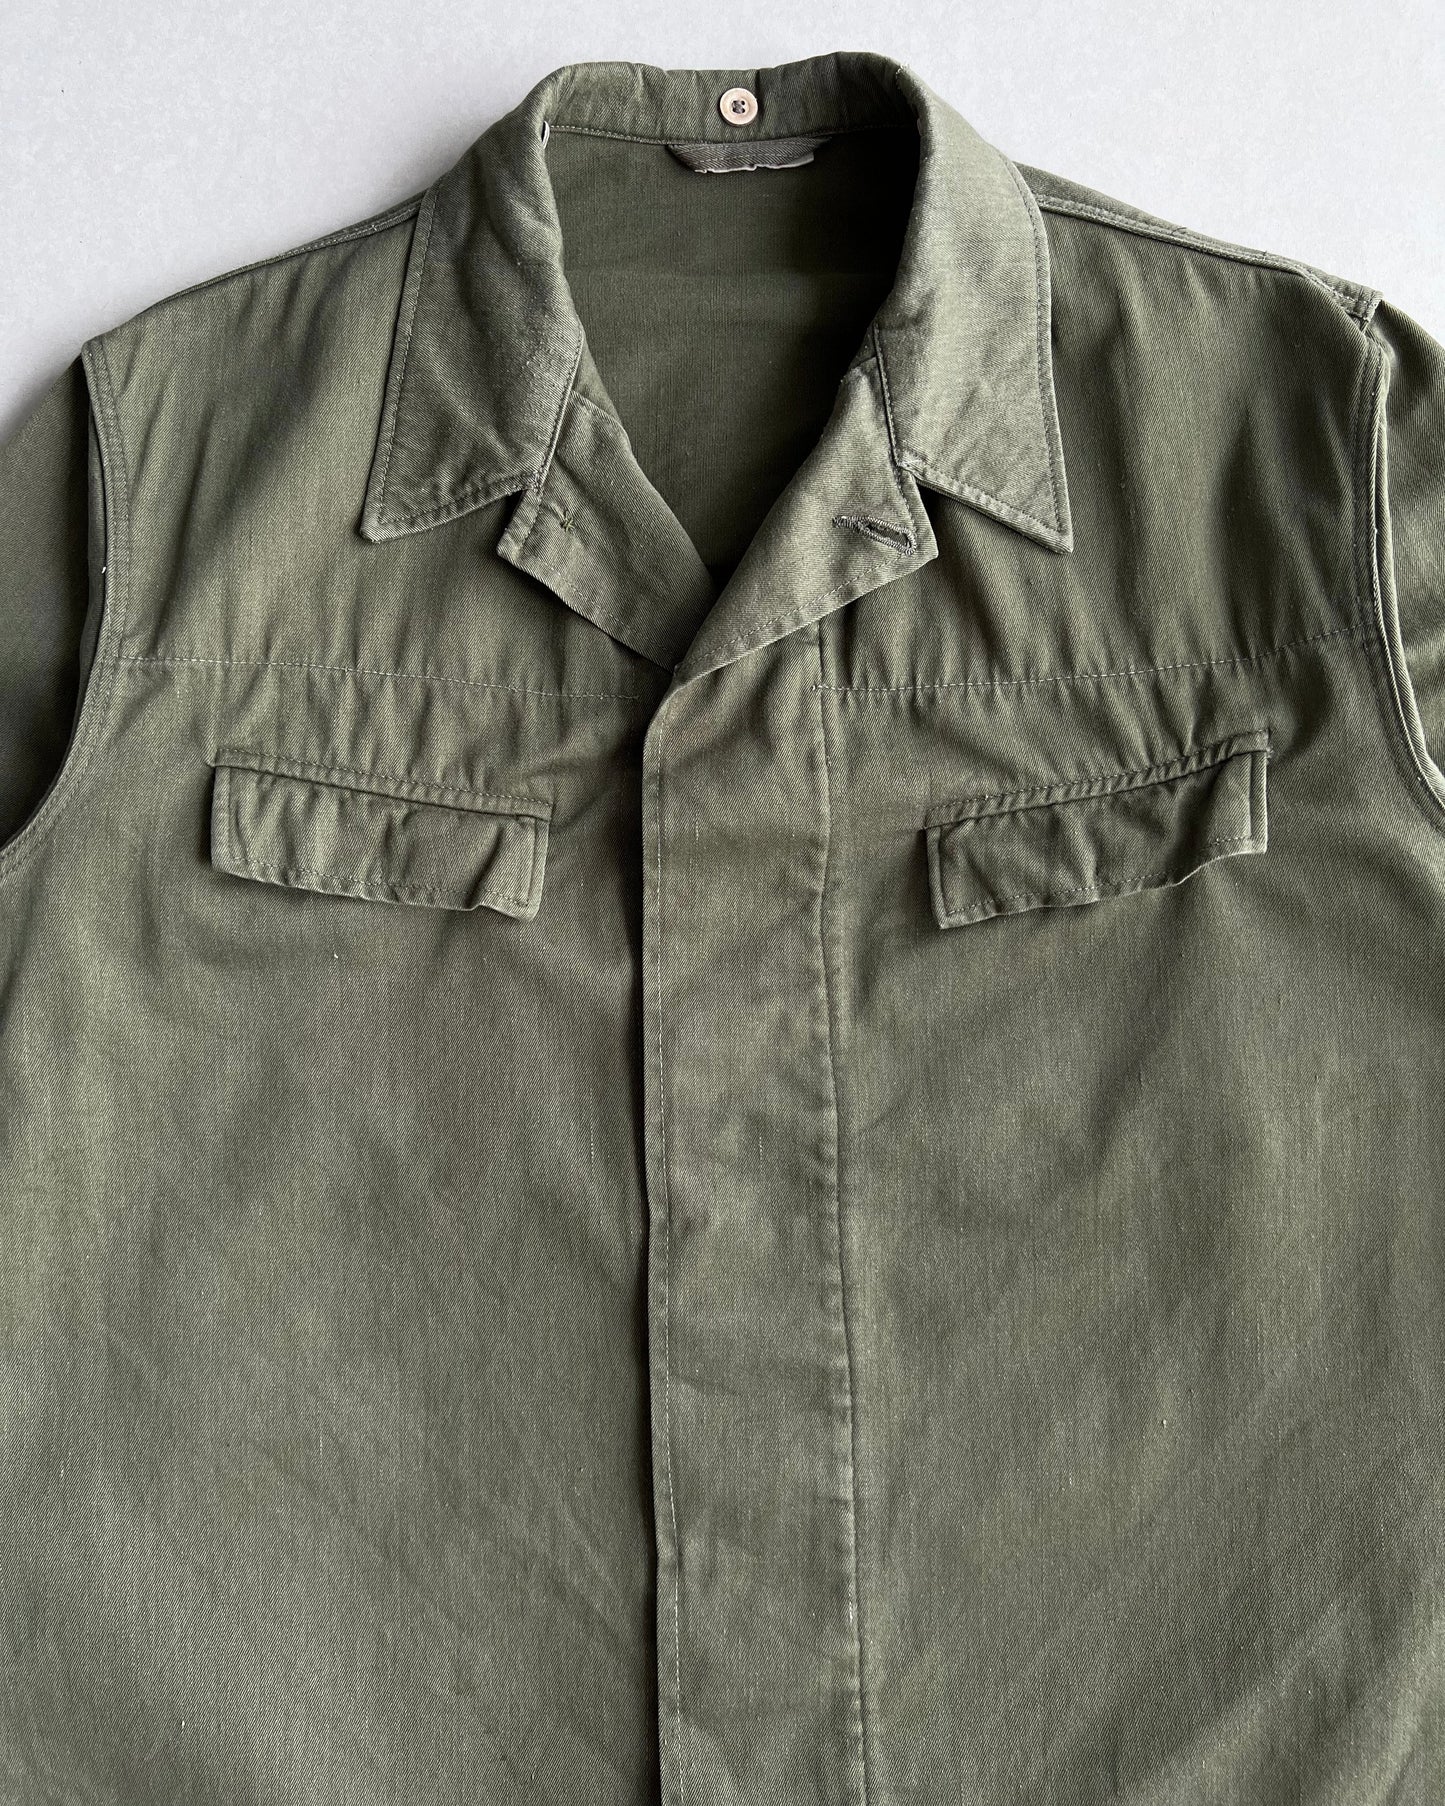 1970S OLIVE EAST GERMAN ARMY SHIRT (M/L)